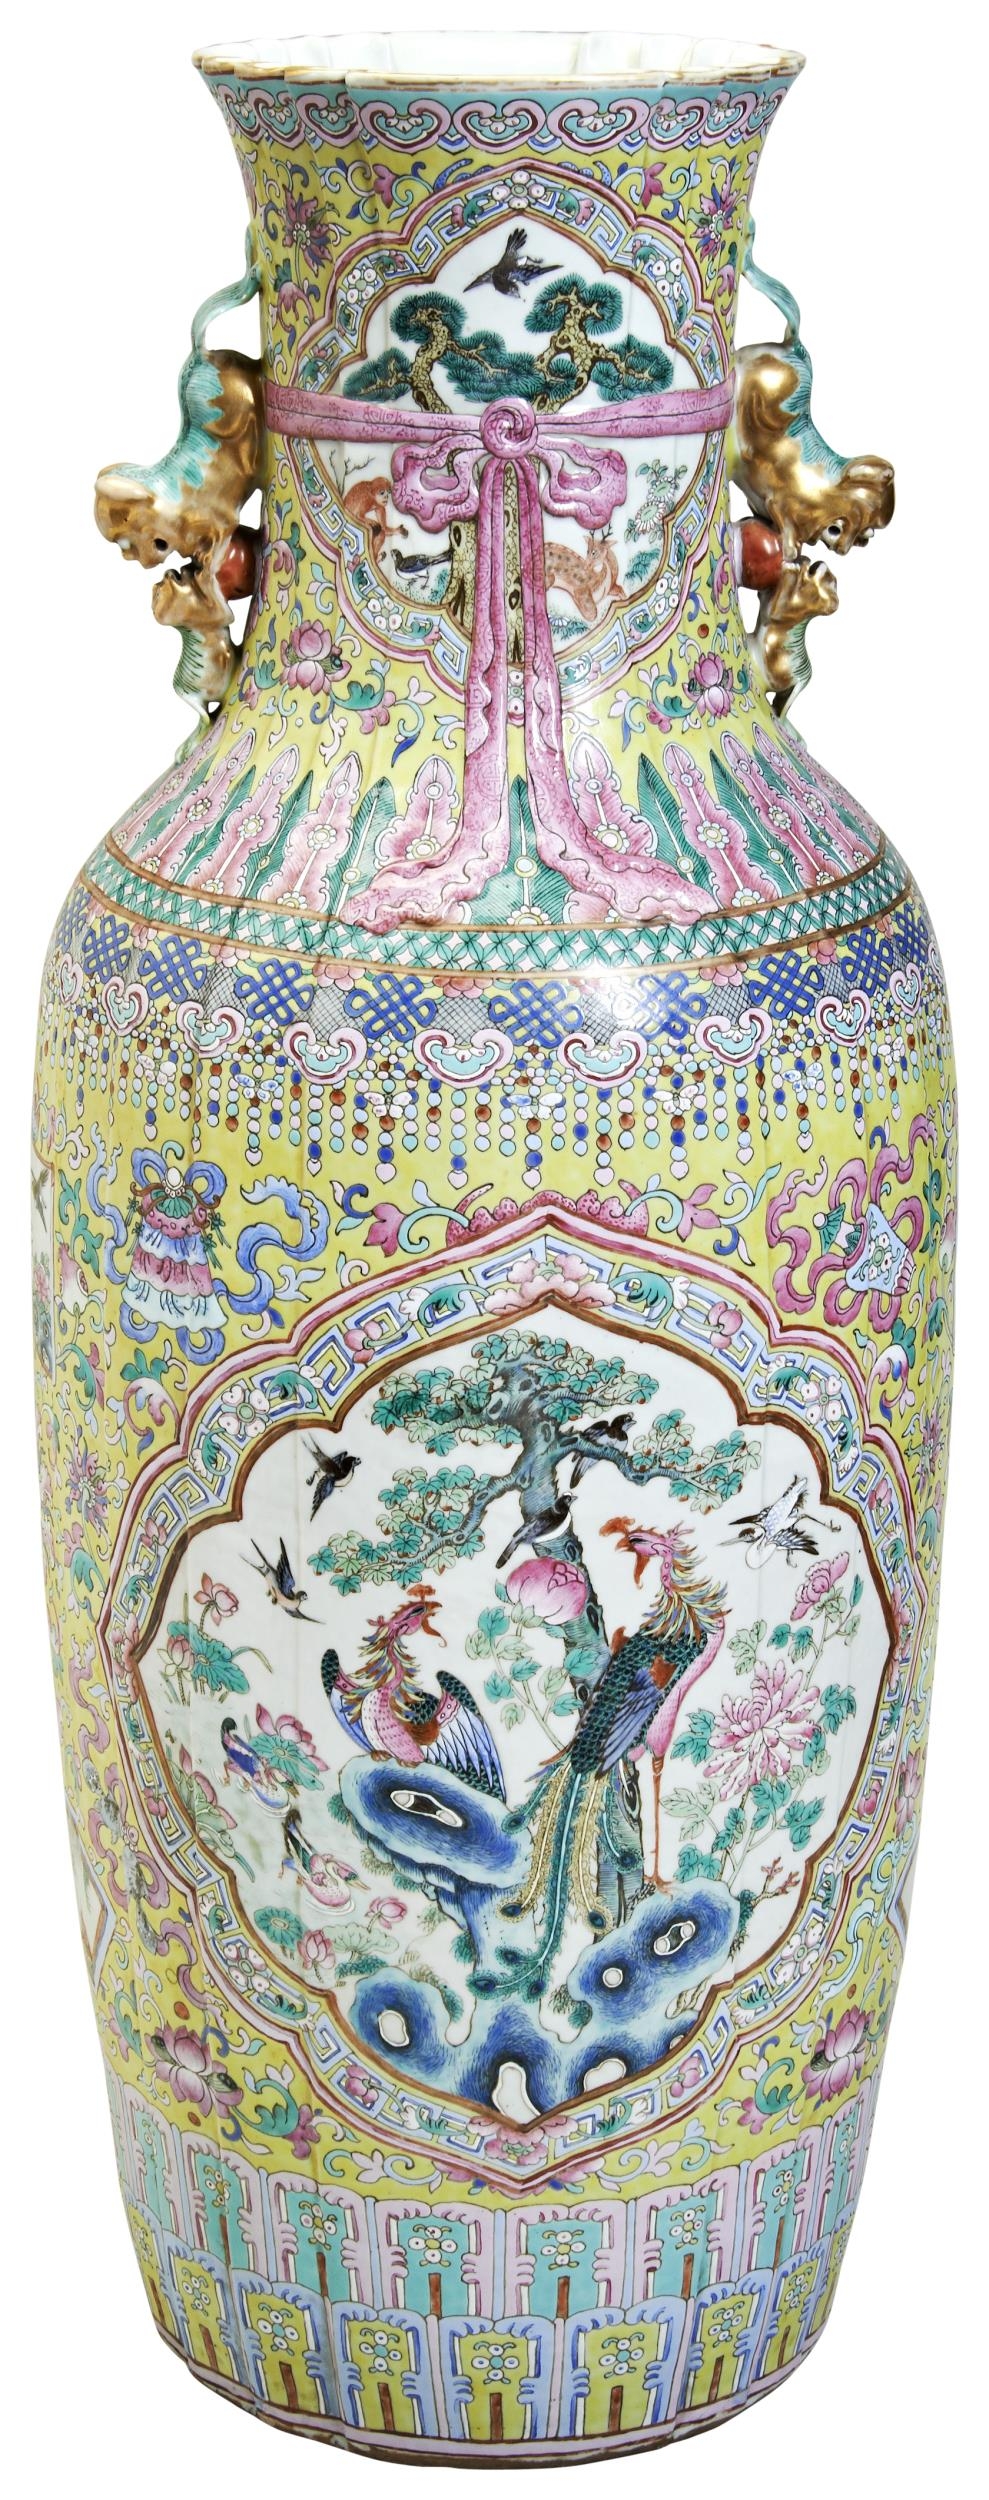 A LARGE FAMILLE ROSE YELLOW-GROUND POUCH-SHAPED FLOOR VASE QING DYNASTY, 19TH CENTURY the sides - Image 4 of 4